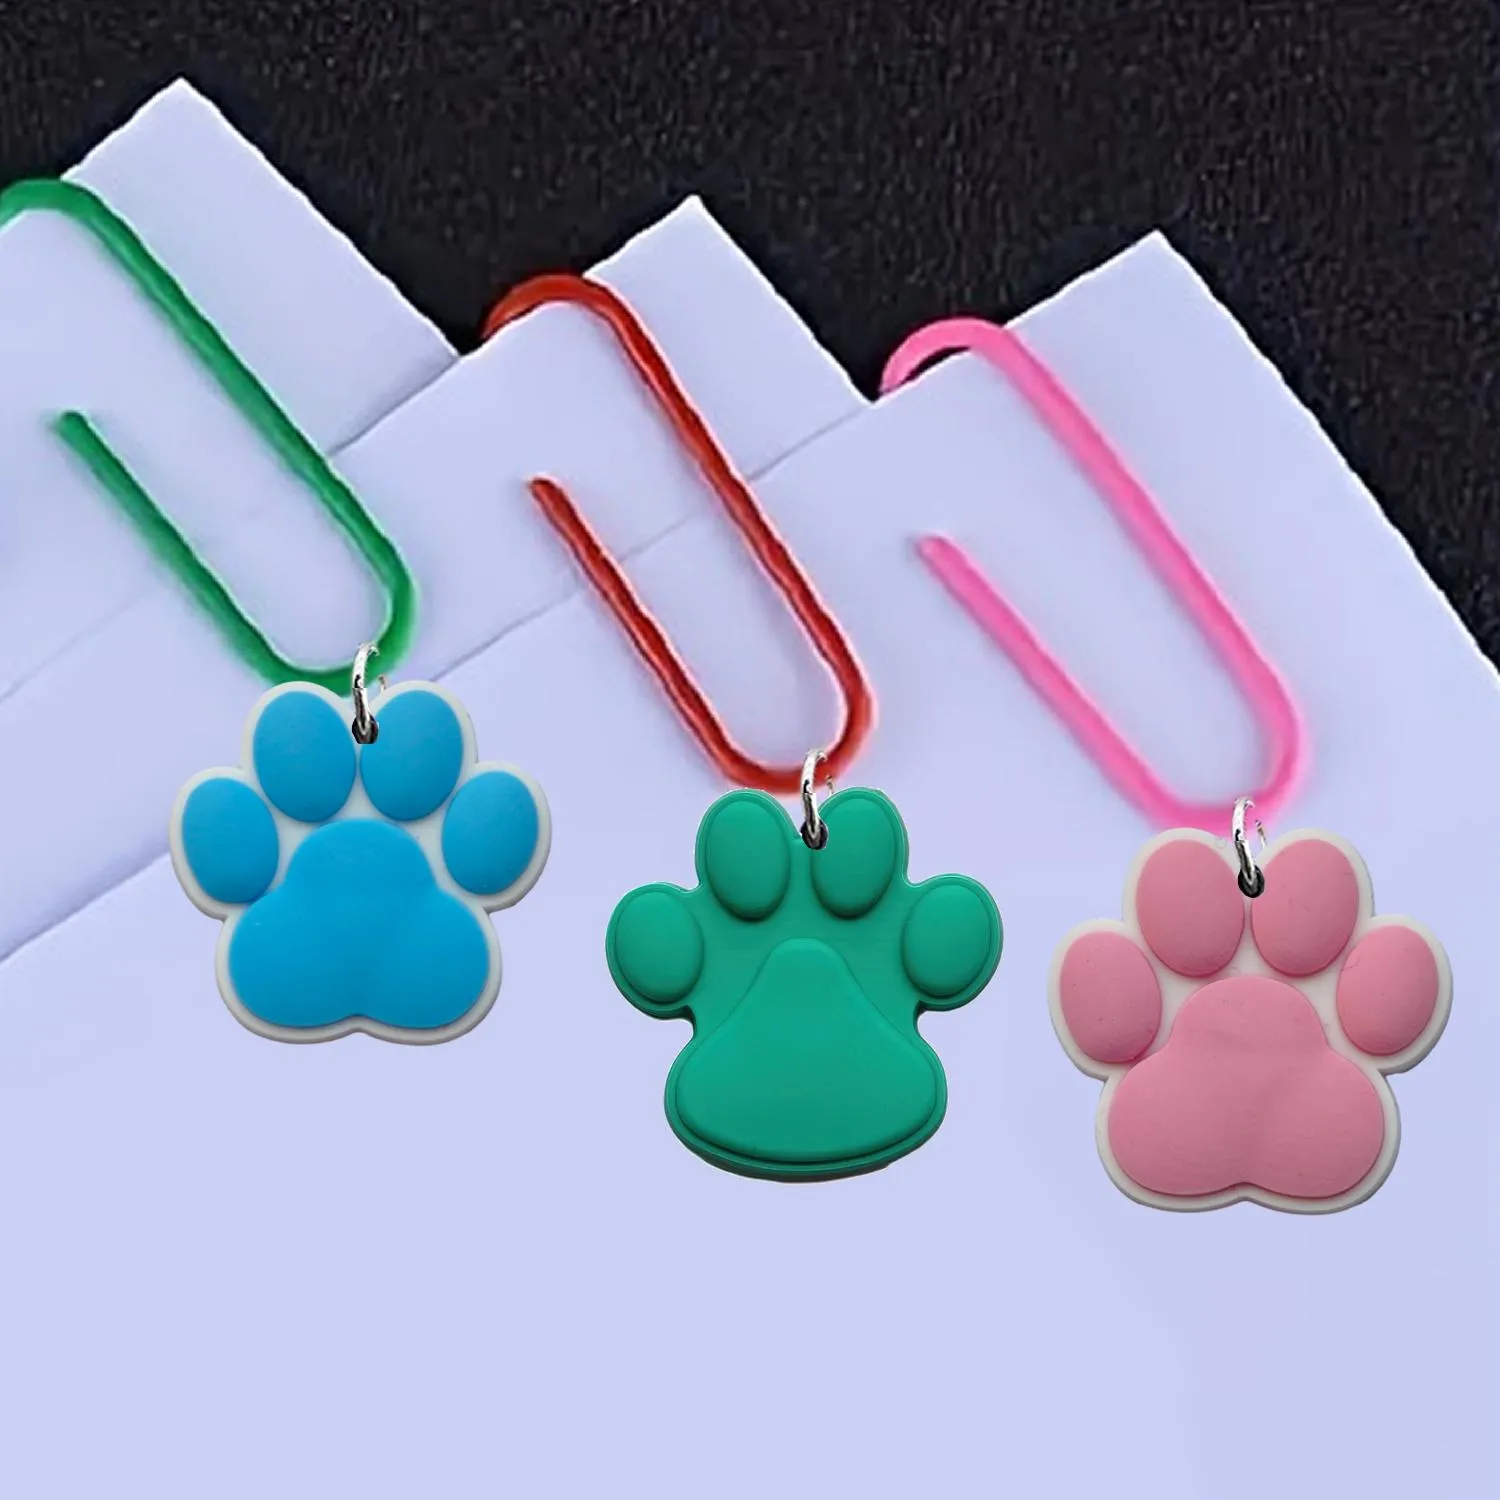 cute seal cartoon paper clips funny bookmarks paperclips colorful pagination bookmark clamp desk accessories stationery for school shaped office supply student book markers